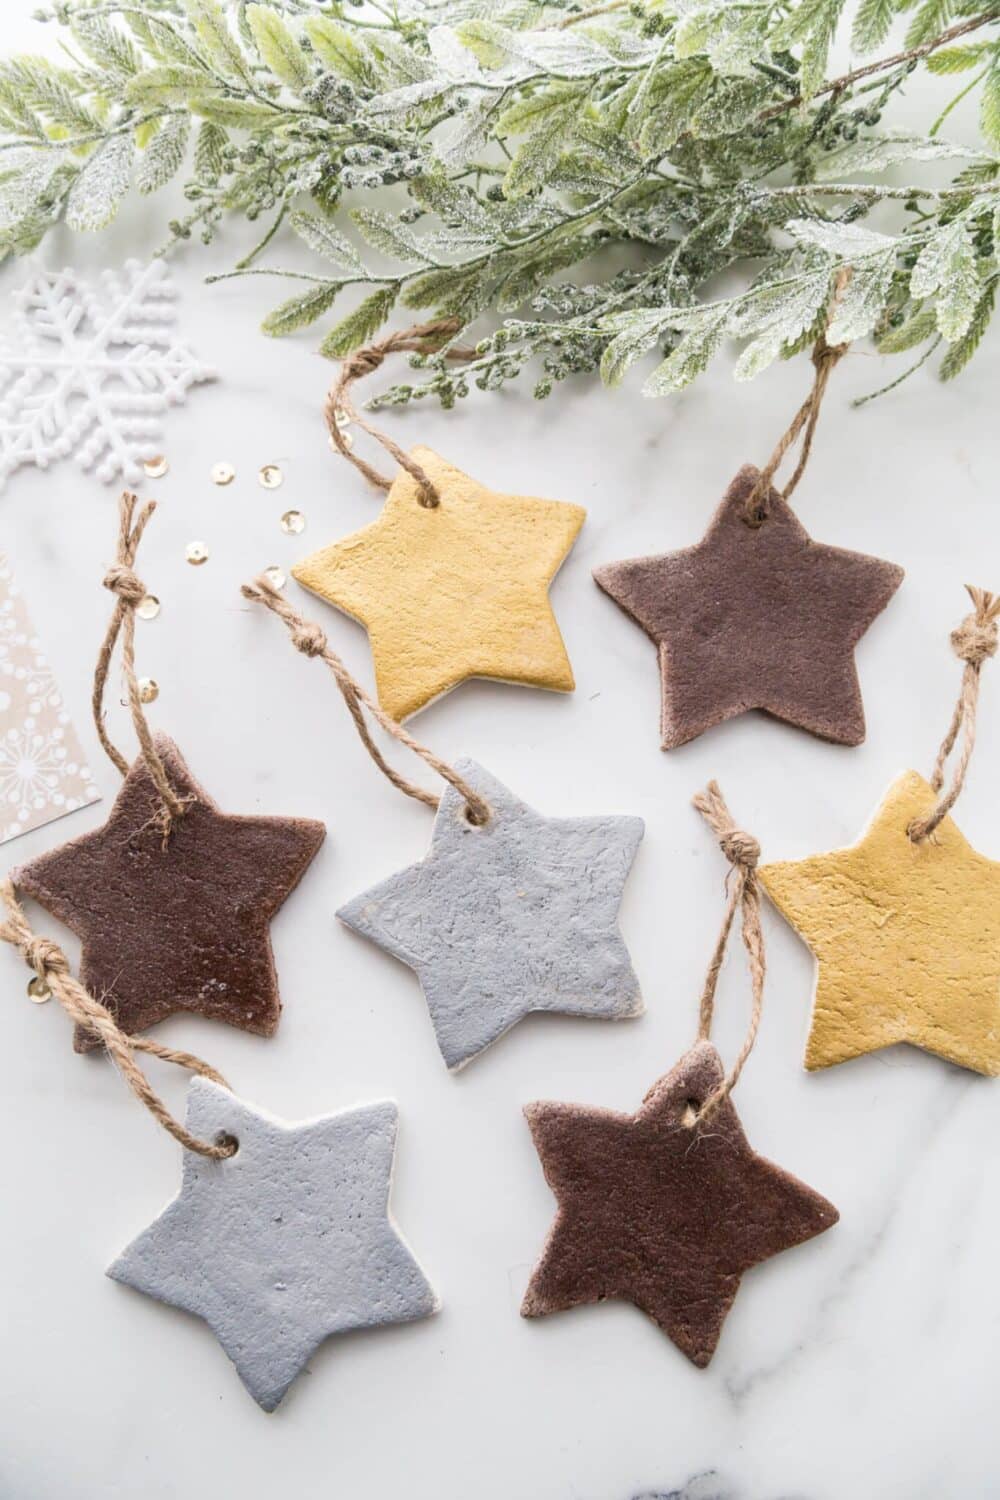 A photo of a group of homemade salt dough star ornaments painted in gold, silver, and brown, a fun ornament idea for preschoolers or kids of any age.